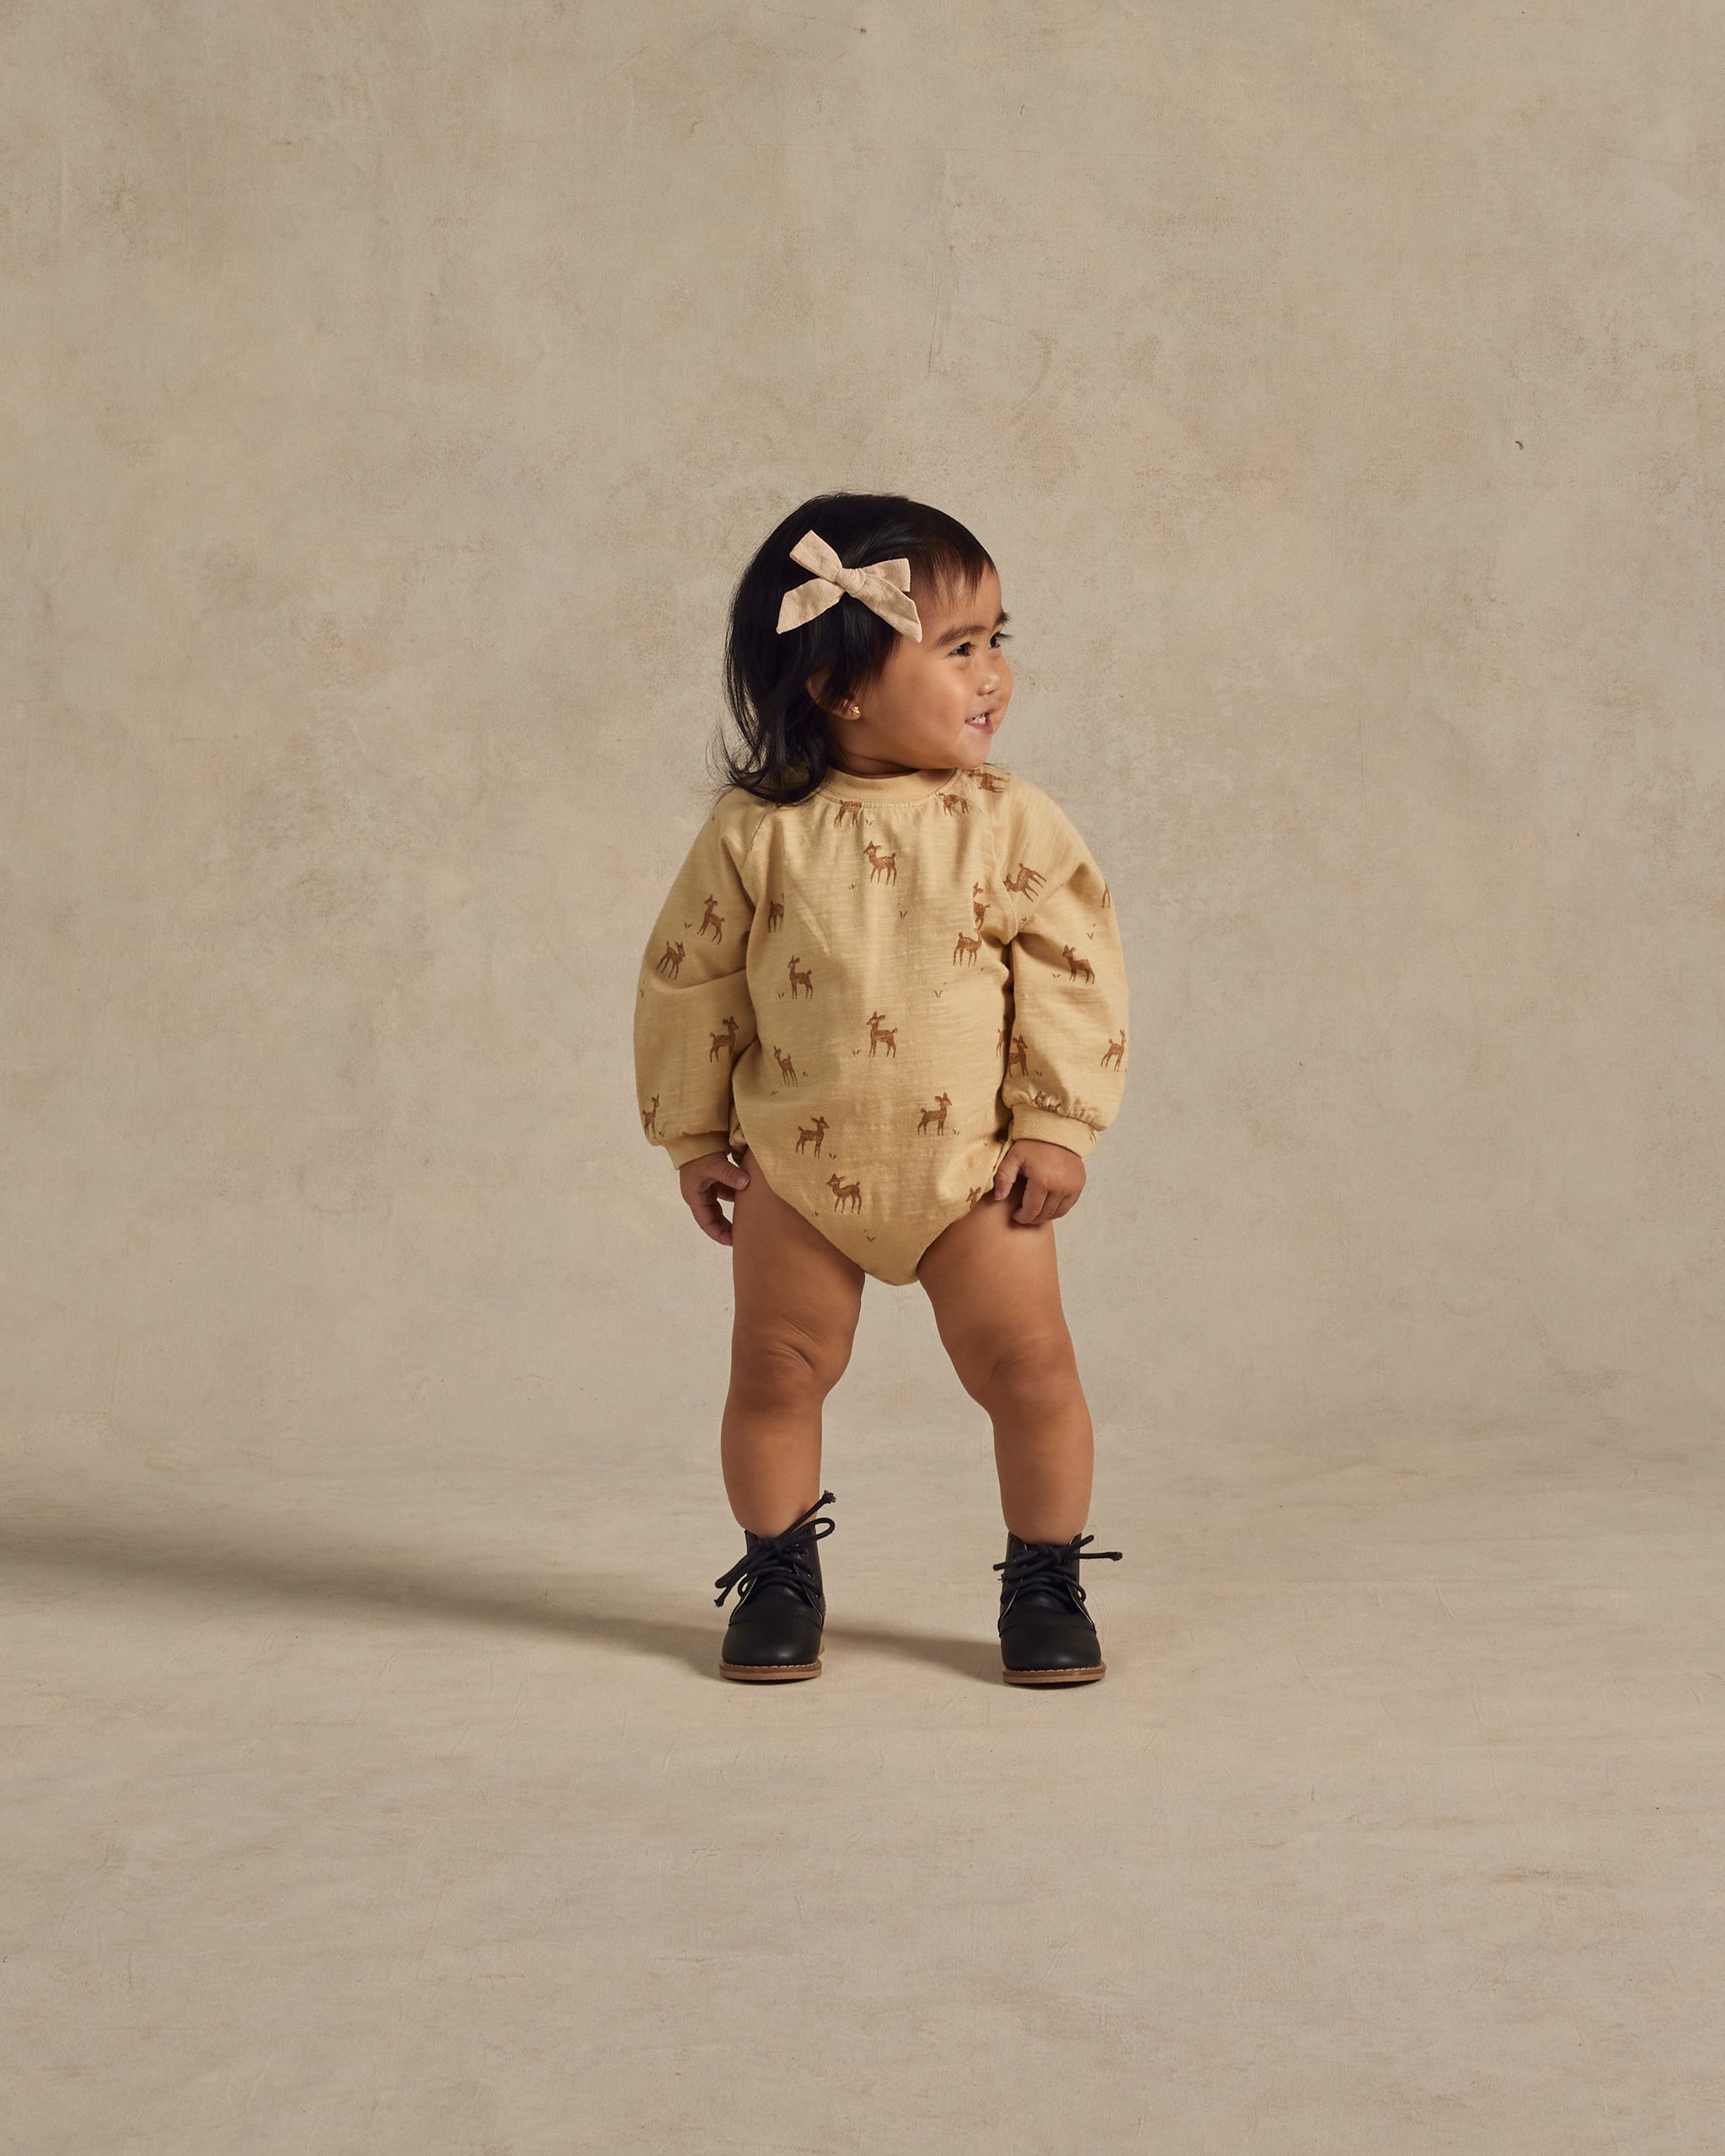 Crewneck Romper || Deer - Rylee + Cru | Kids Clothes | Trendy Baby Clothes | Modern Infant Outfits |